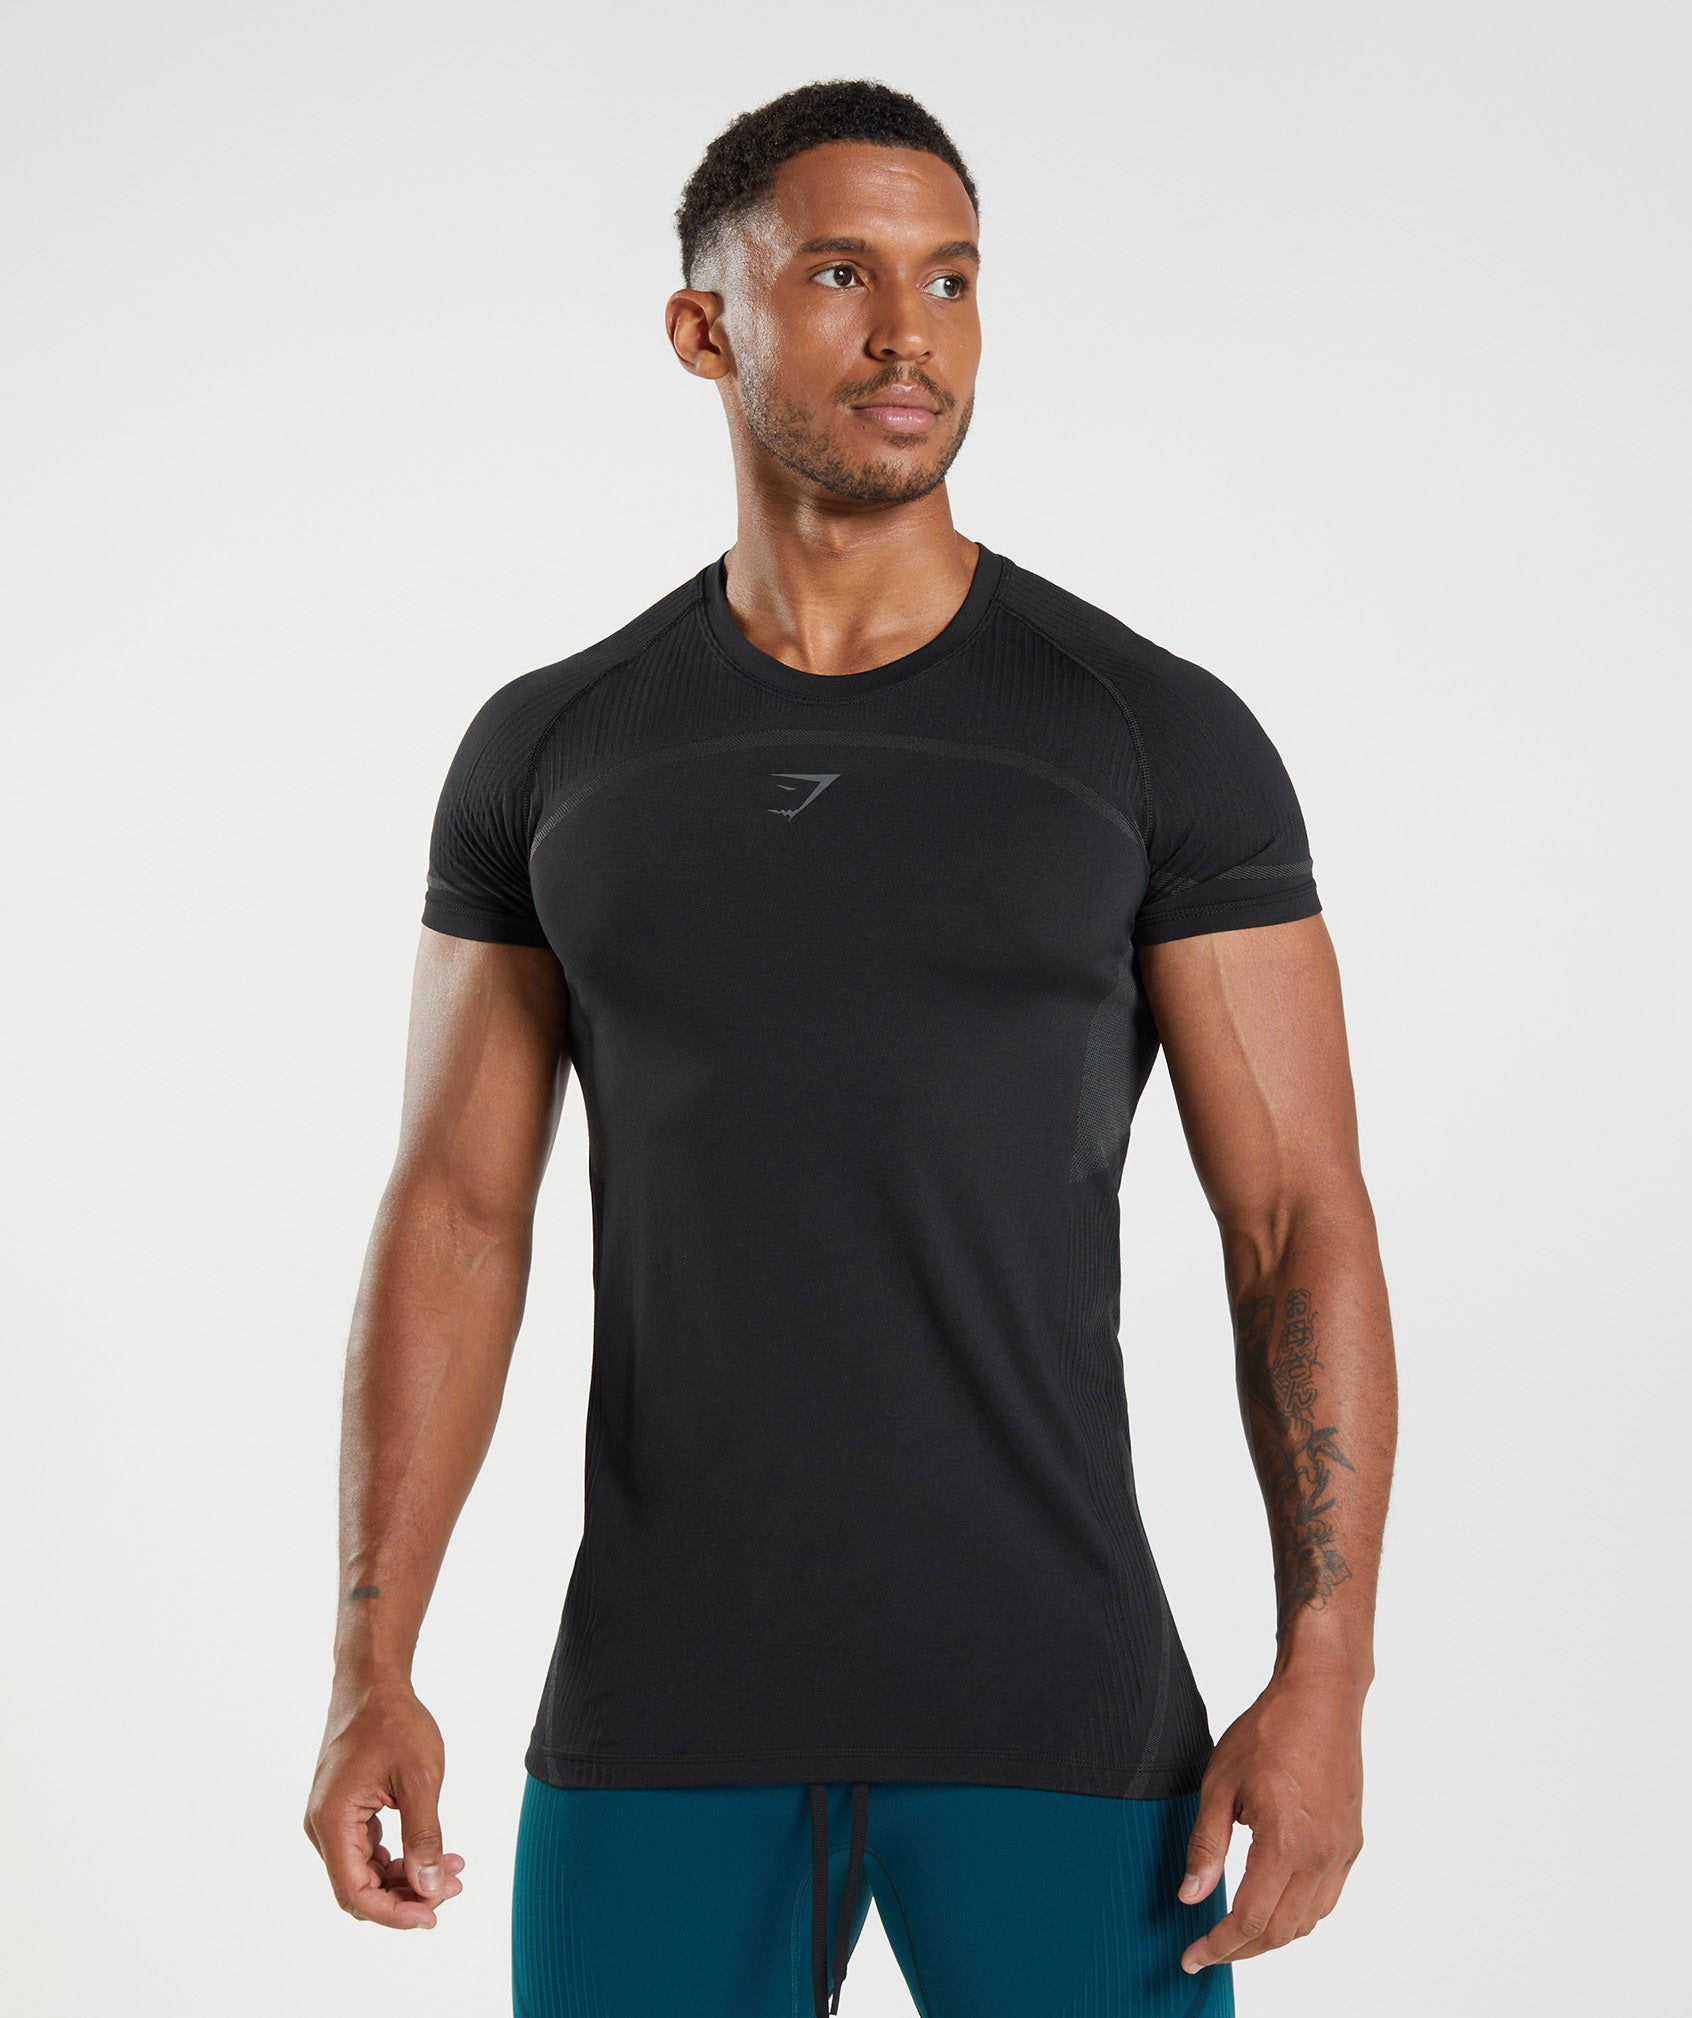 315 Seamless T-Shirt in Black is out of stock